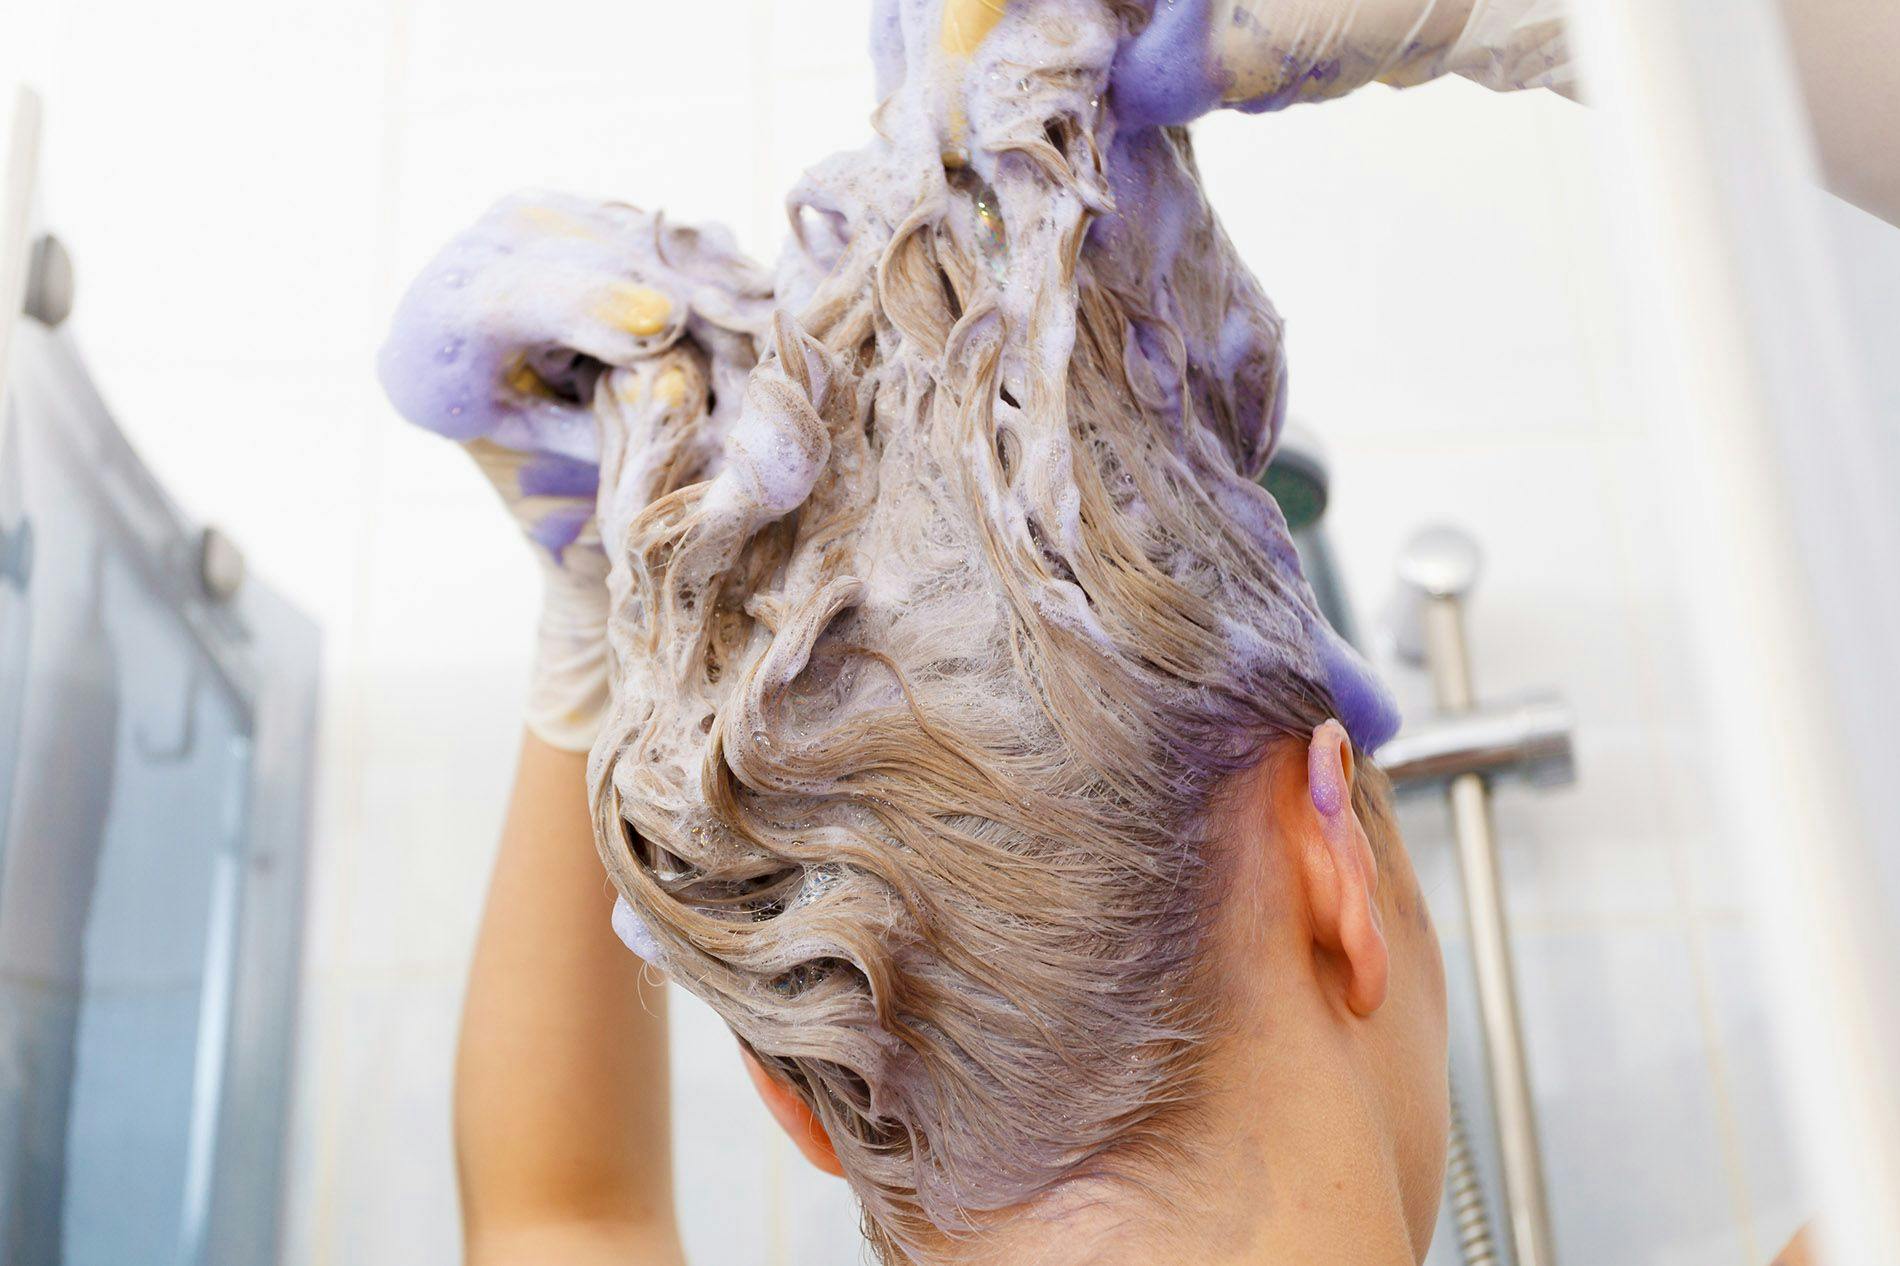 Purple vs Blue Shampoo: What’s the Difference?